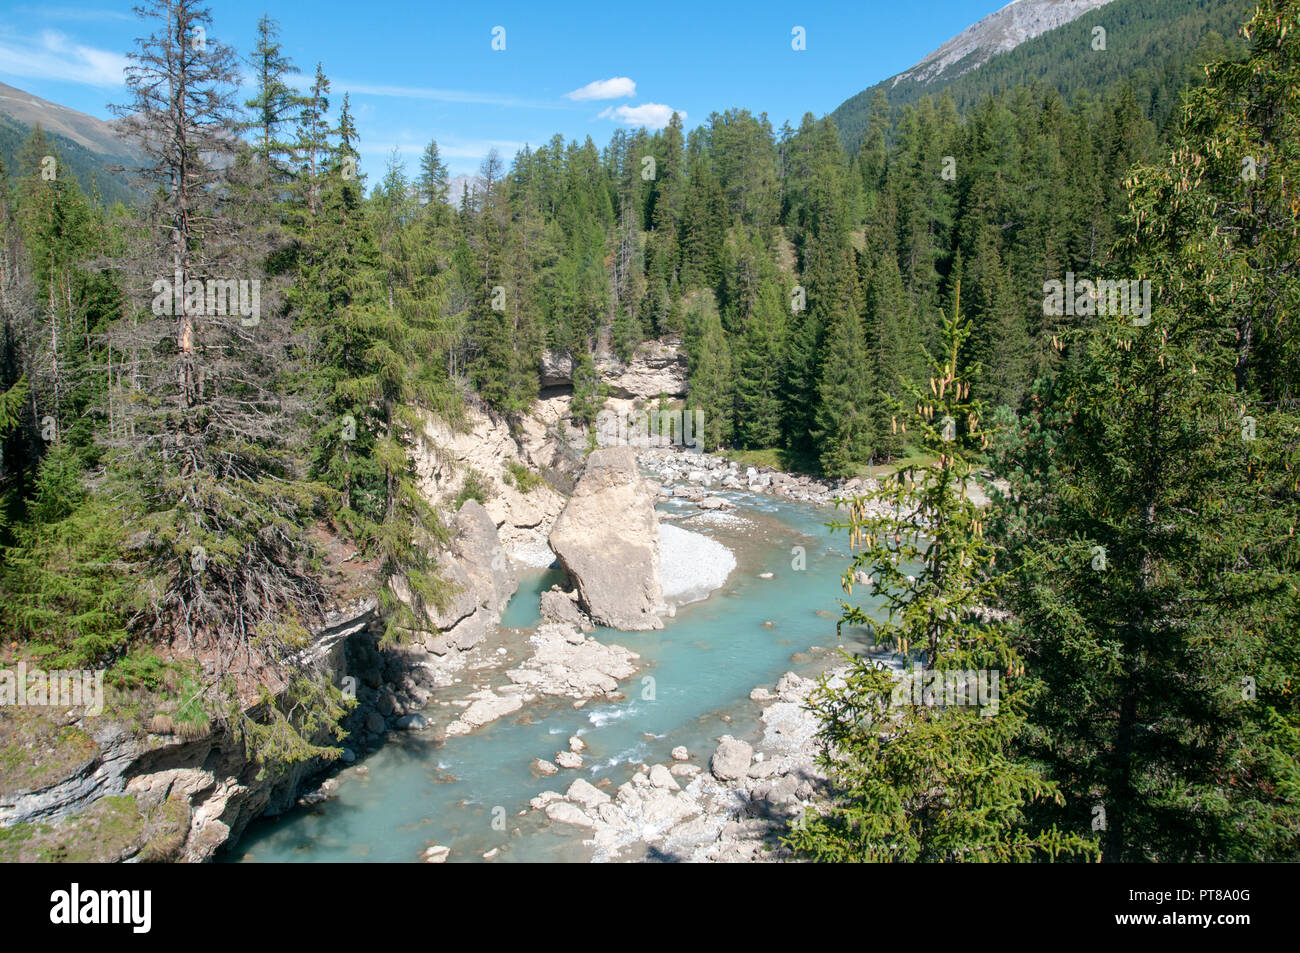 The Inn River near S-chanf in the Maloja Region in the Swiss canton of Graubünden. Stock Photo